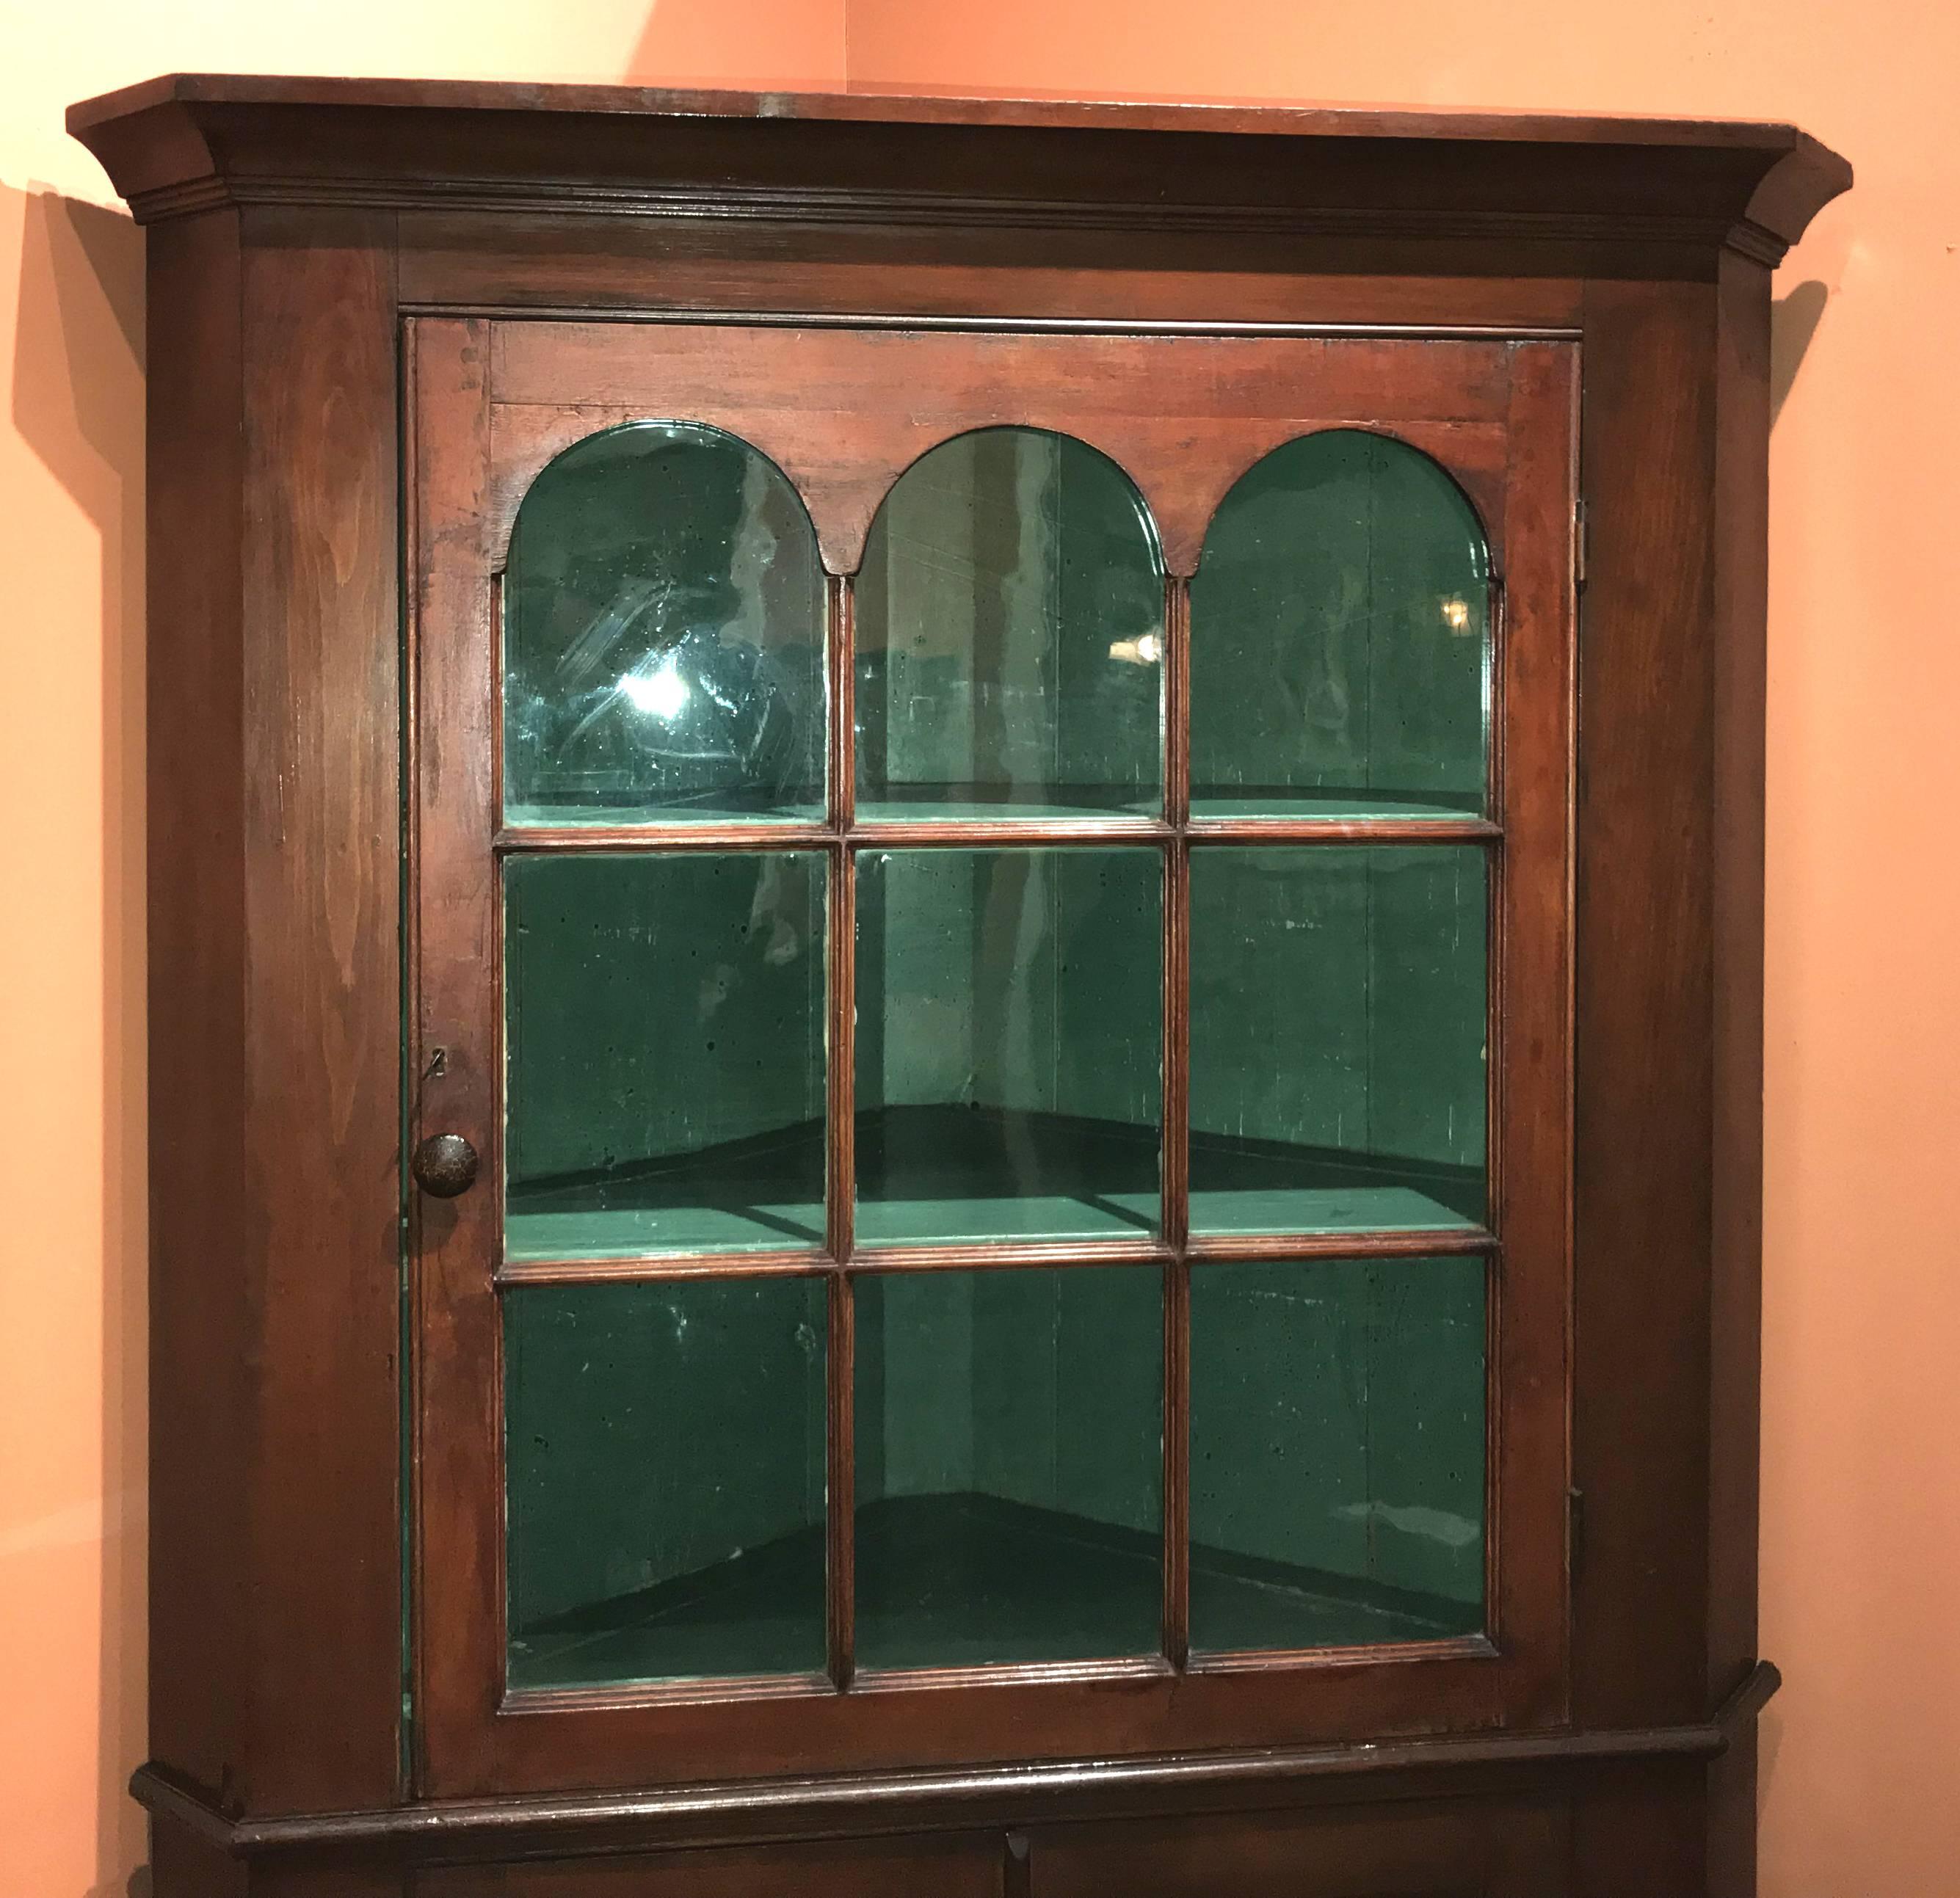 A fine Federal period two part cherry cupboard, its upper case with molded cornice surmounting a glazed triple arch glass door with wavy glass panes, opening to reveal a green painted interior with two interior shelves, over a lower case with waist